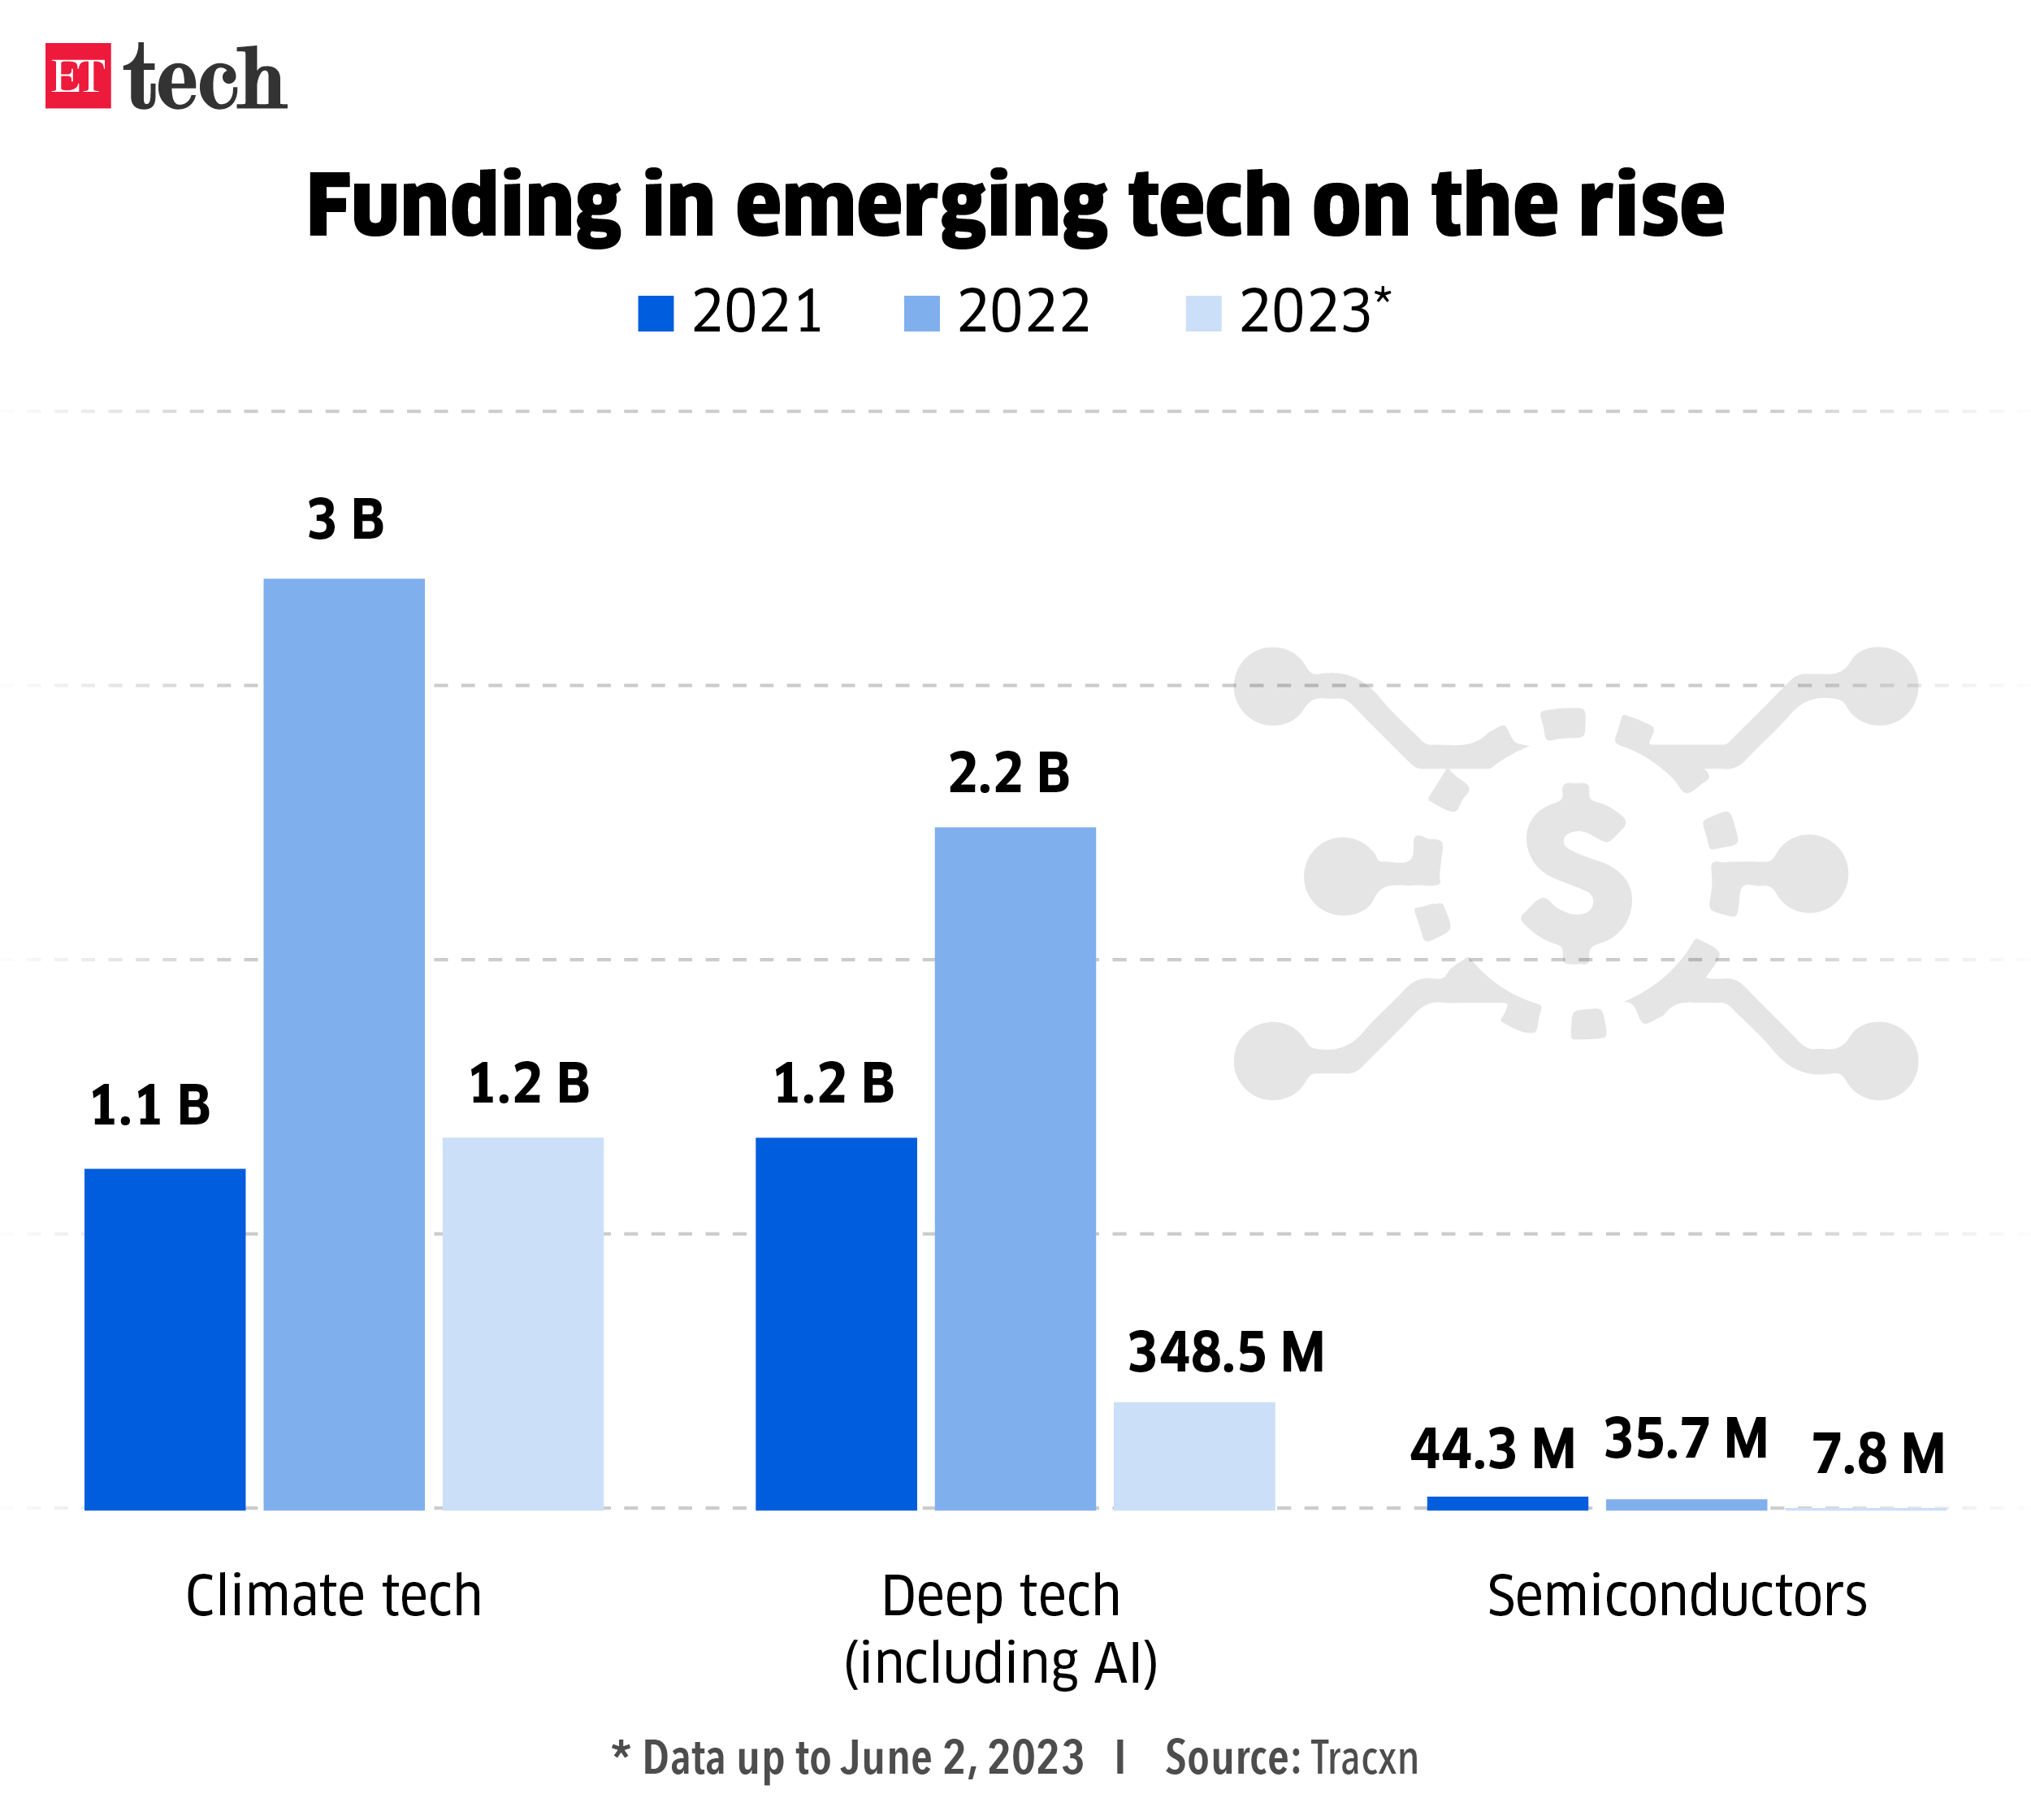 Funding in emerging tech on the rise